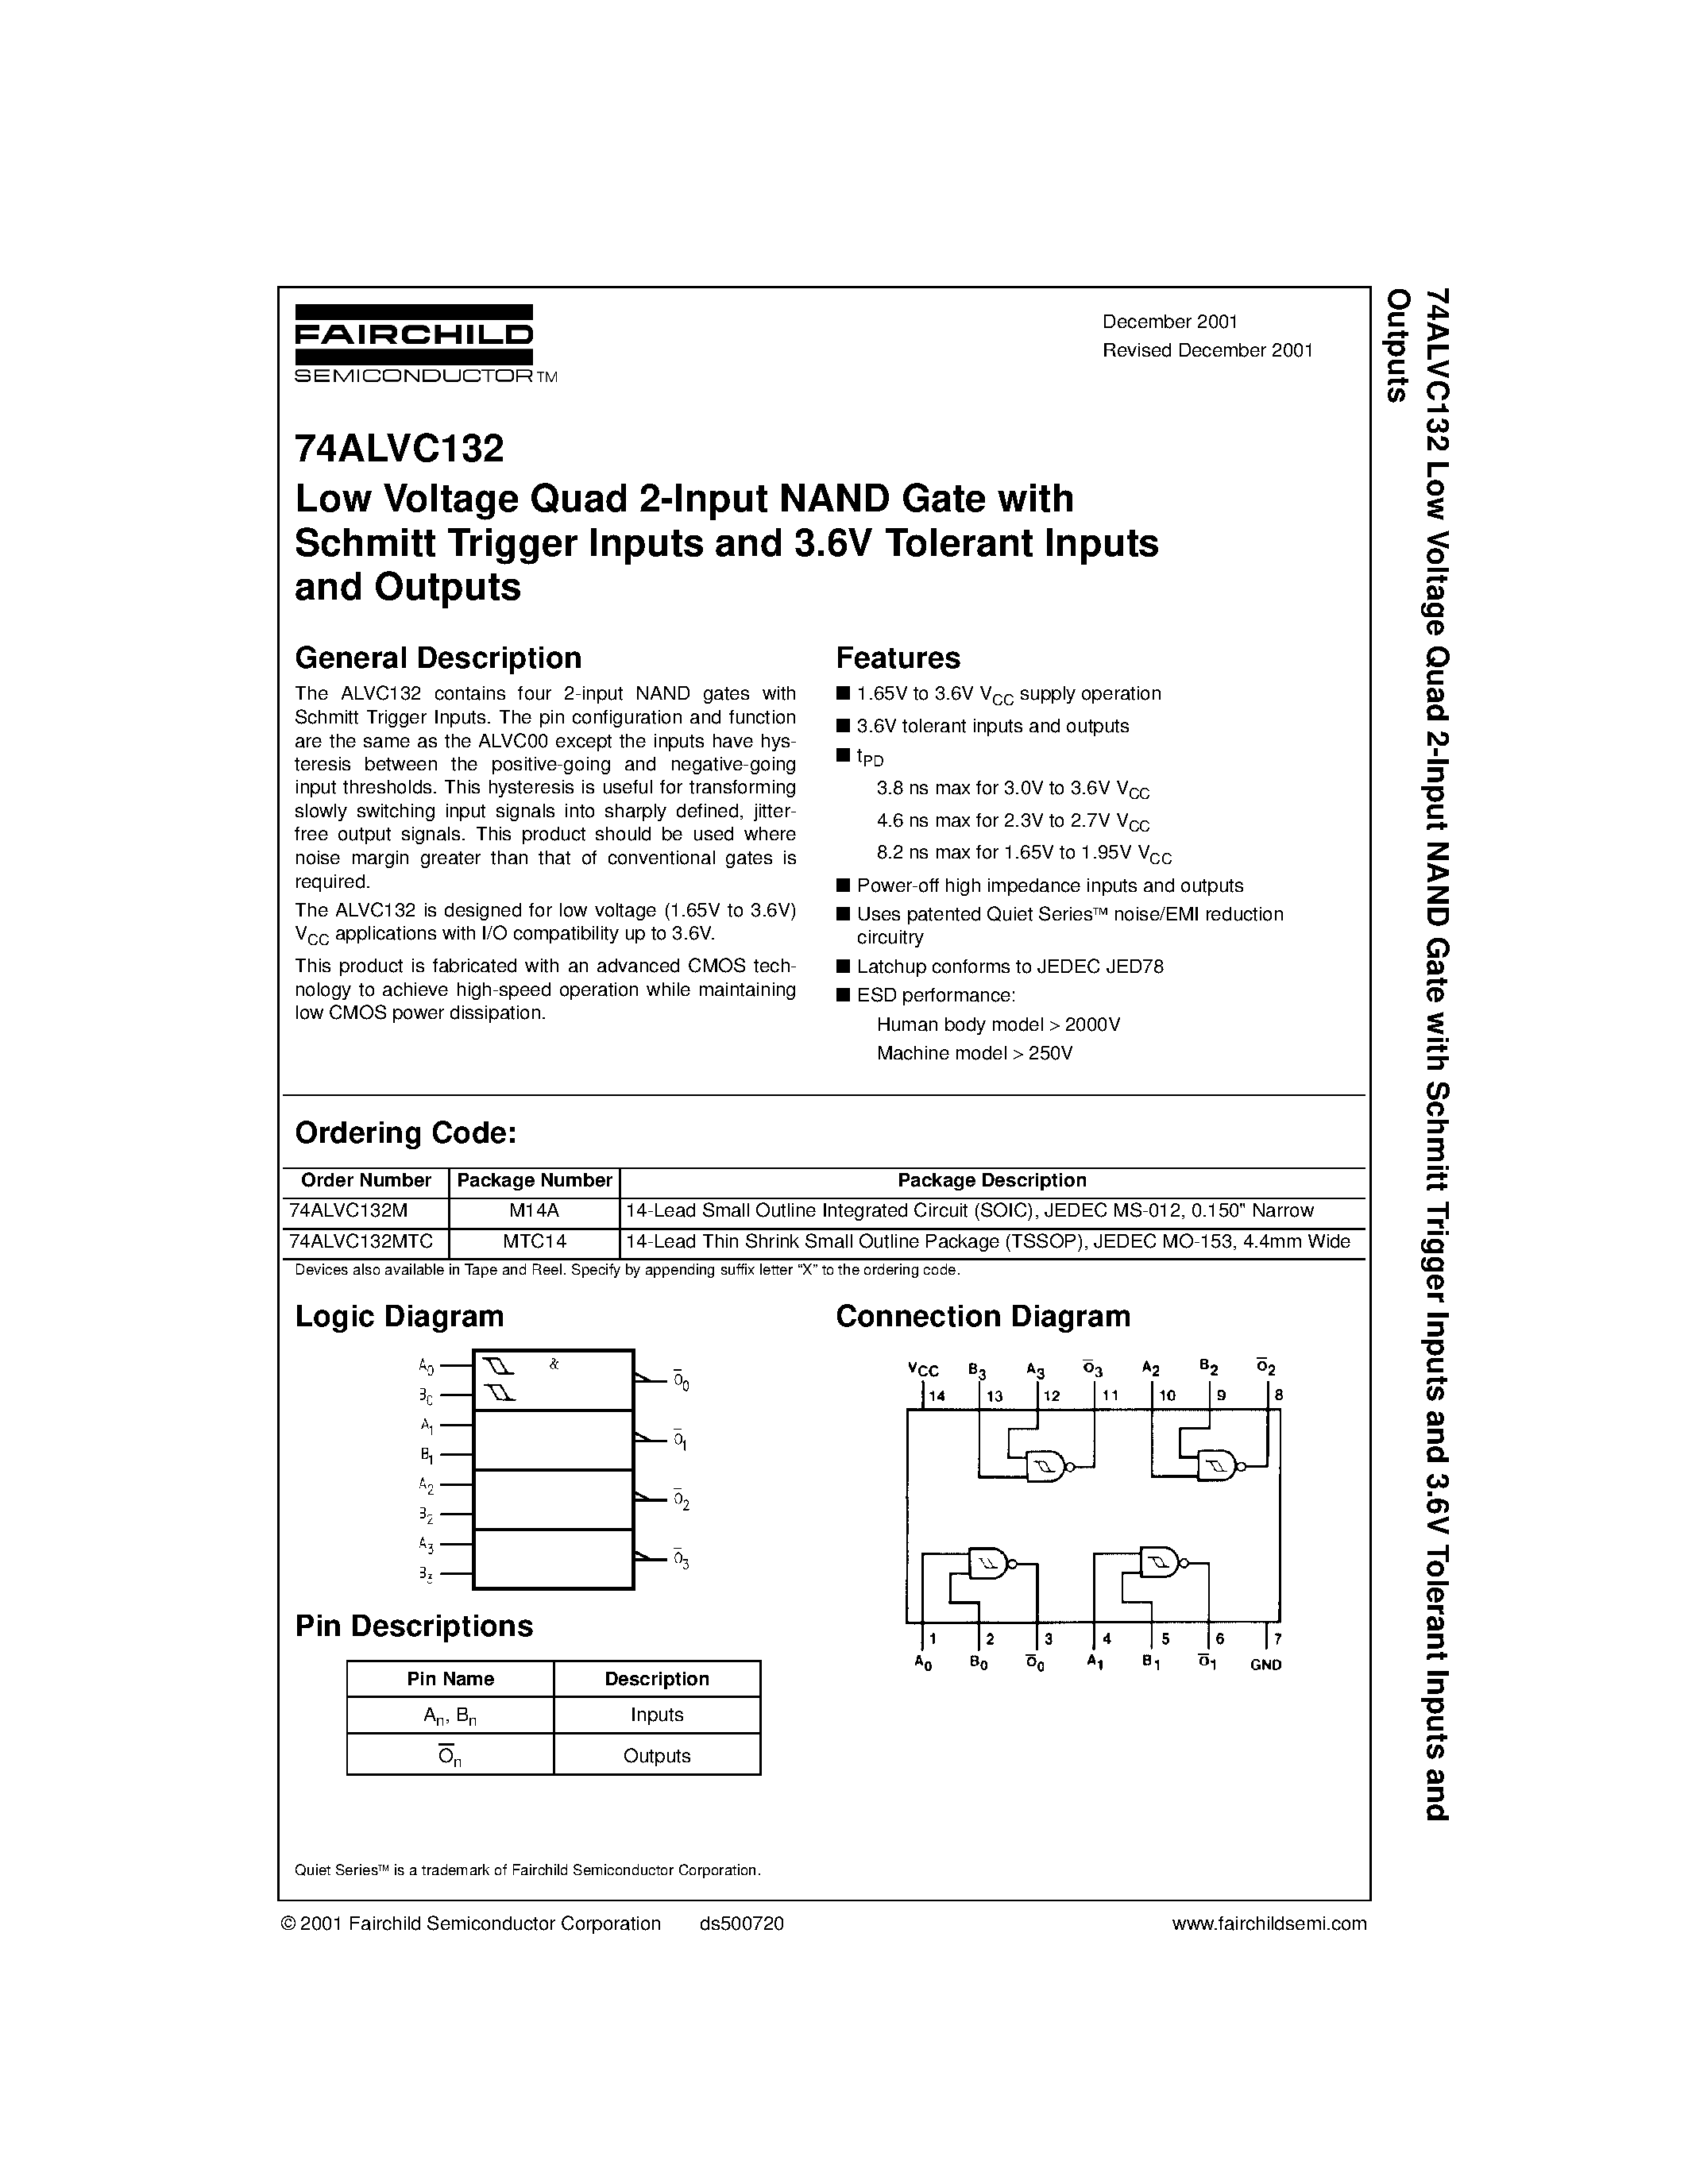 Datasheet 74ALVC132MTC - Low Voltage Quad 2-Input NAND Gate with Schmitt Trigger Inputs and 3.6V Tolerant Inputs and Outputs page 1